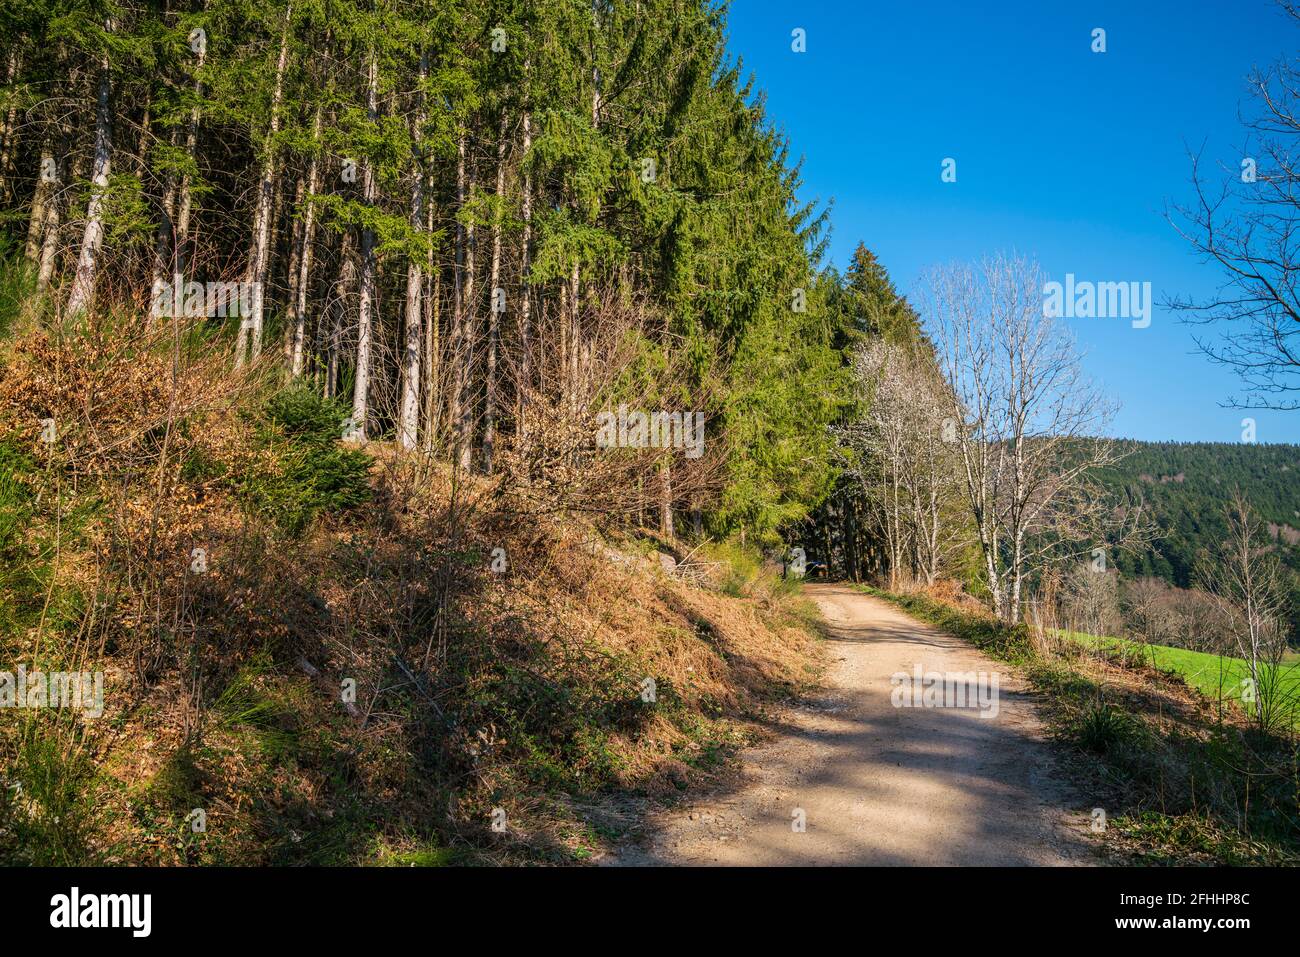 Germany, Black forest paradise untouched nature landscape of hiking trail along edge of the forest in springtime perfect for hiking Stock Photo